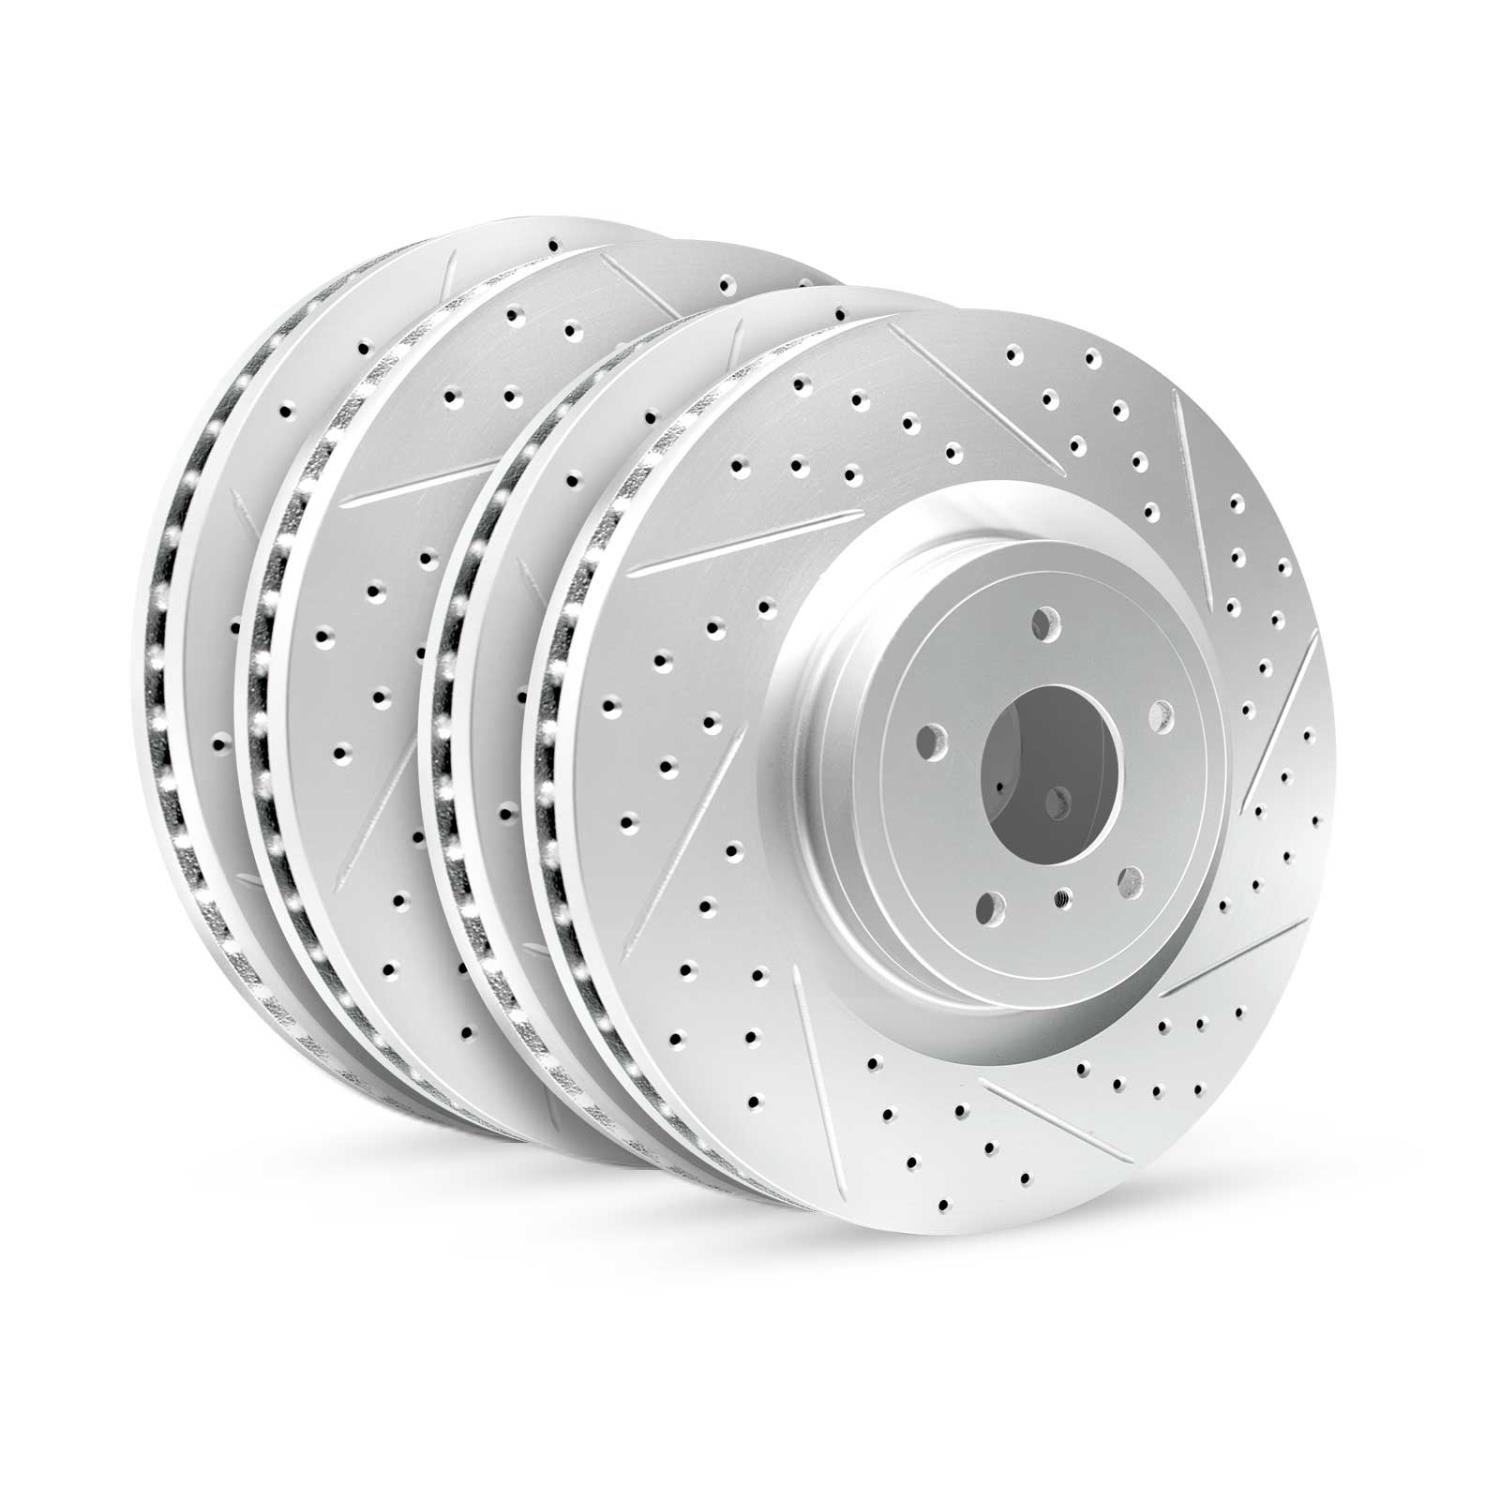 GEO-Carbon Drilled/Slotted Rotors, 1992-2003 Lexus/Toyota/Scion, Position: Front/Rear